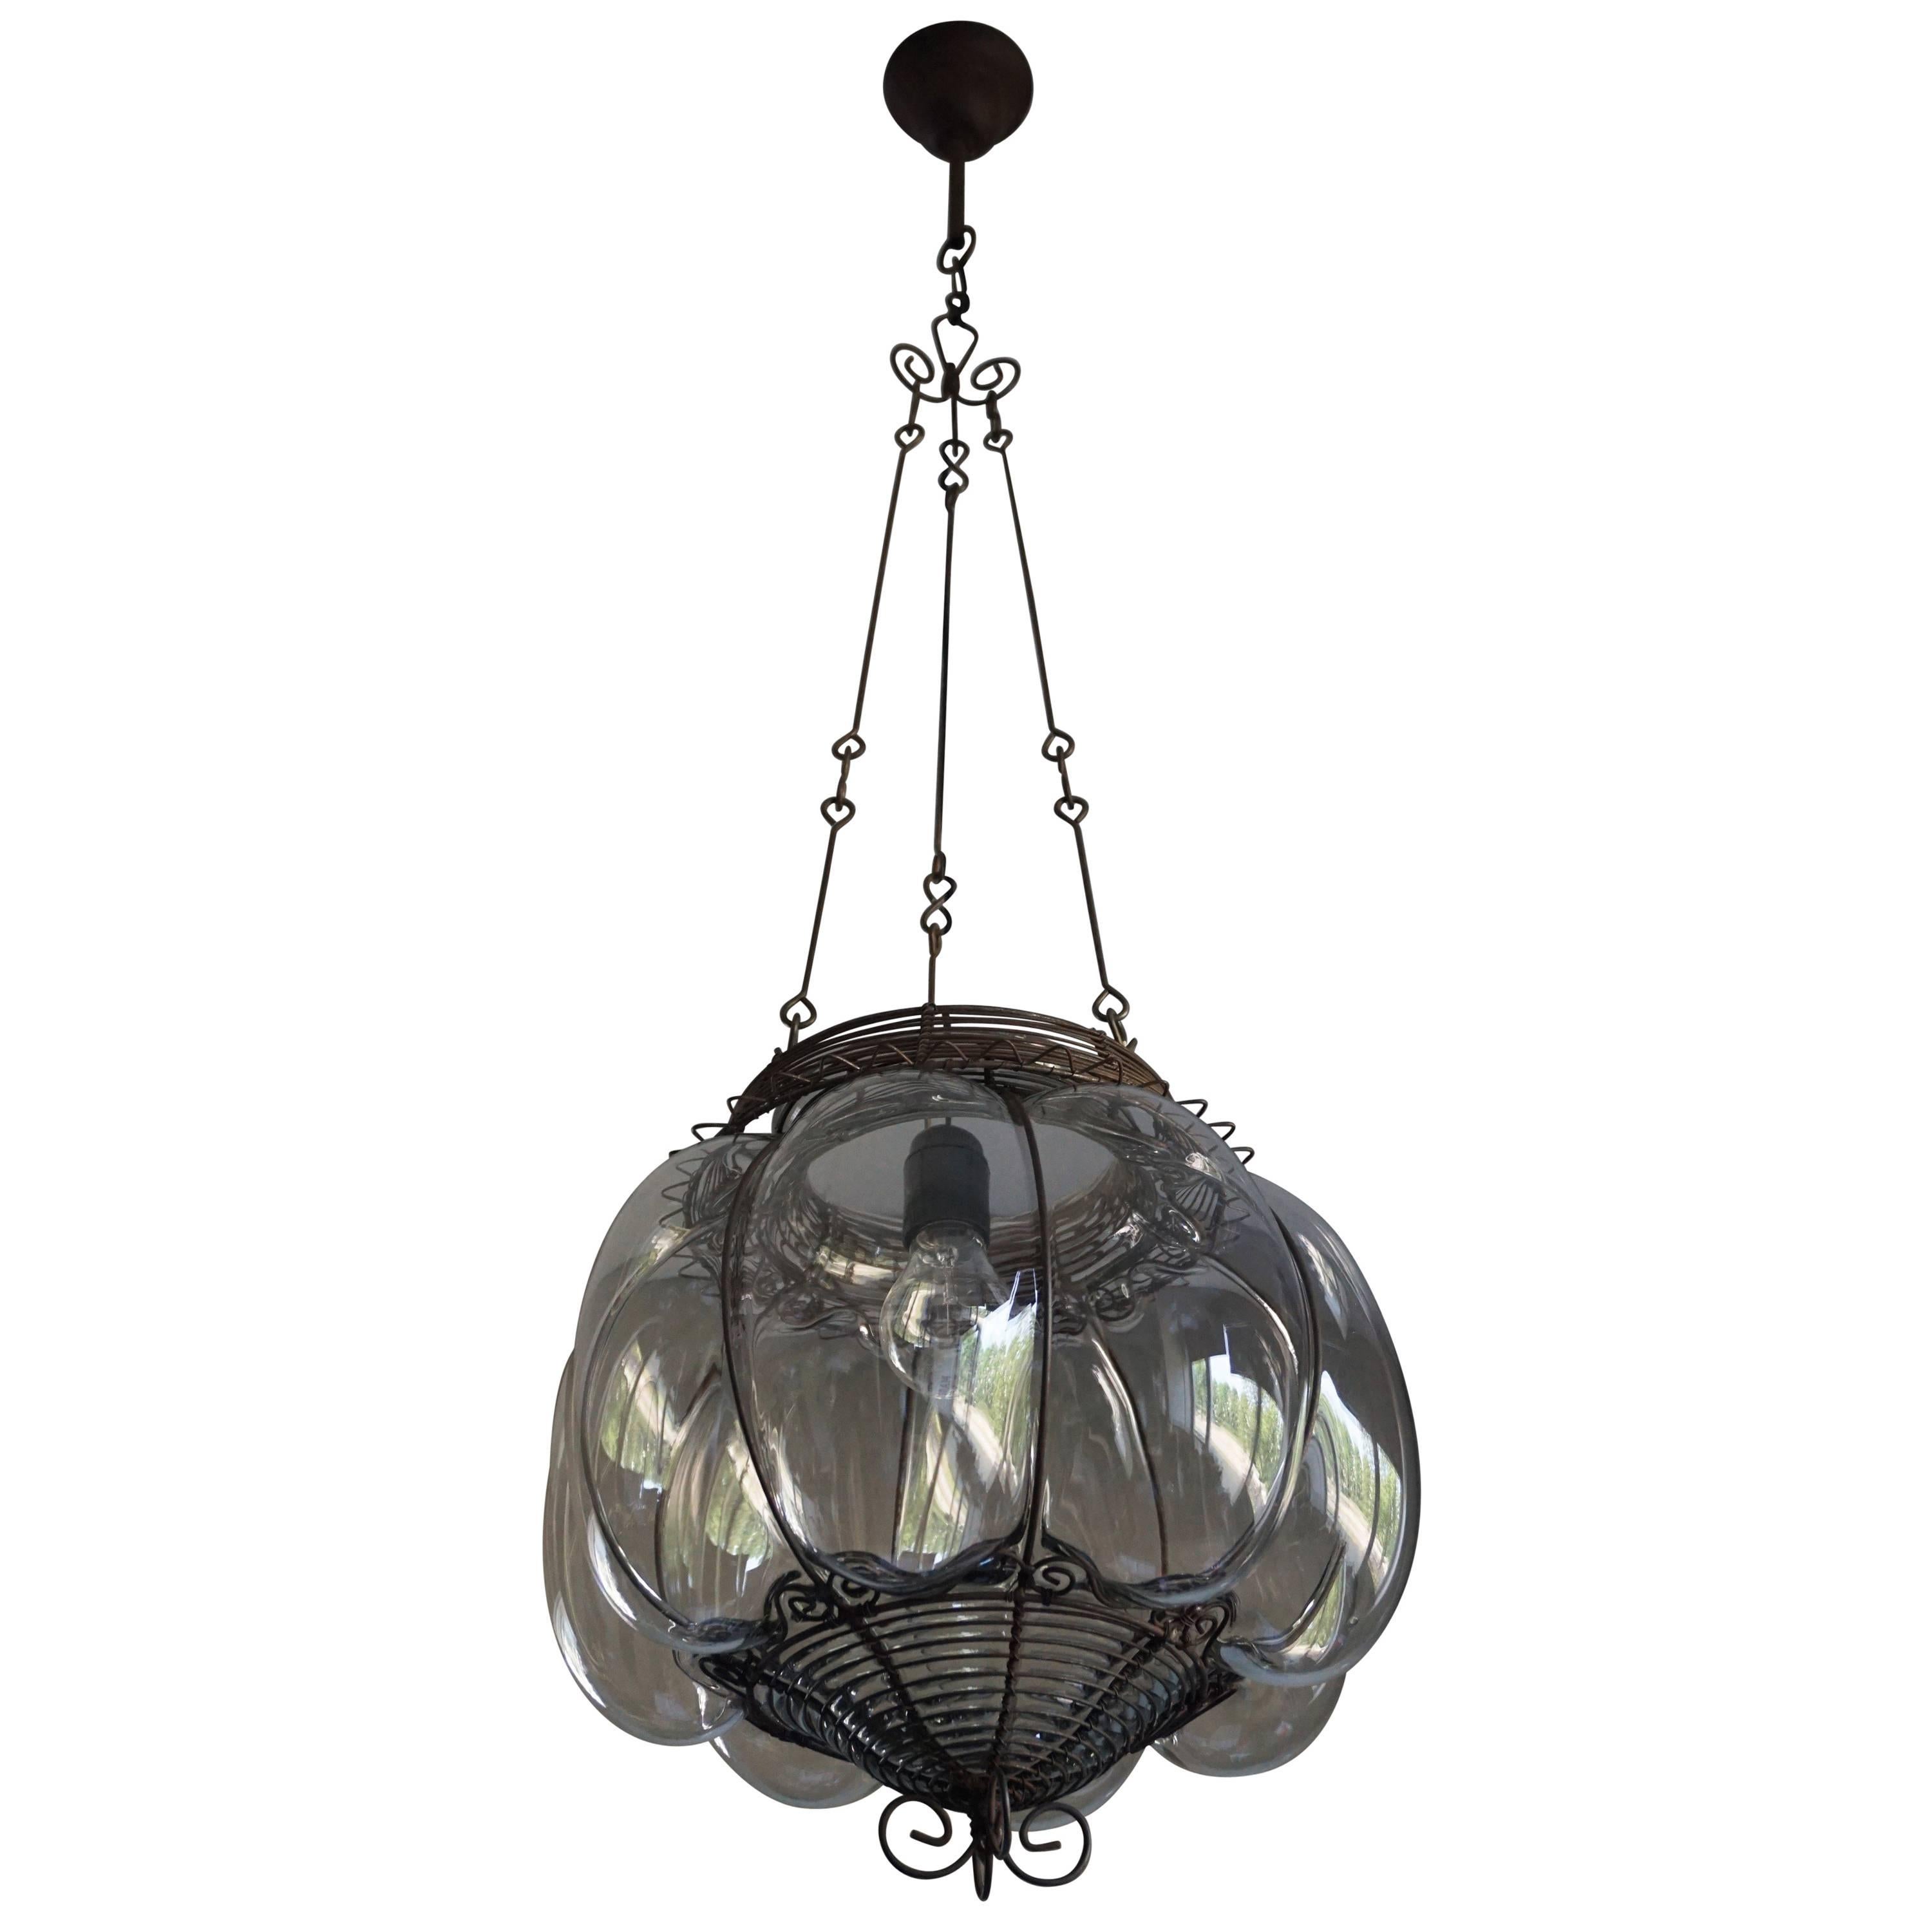 Venetian Mouthblown Glass into a Hand-crafted Iron Frame Pendant Light Fixture